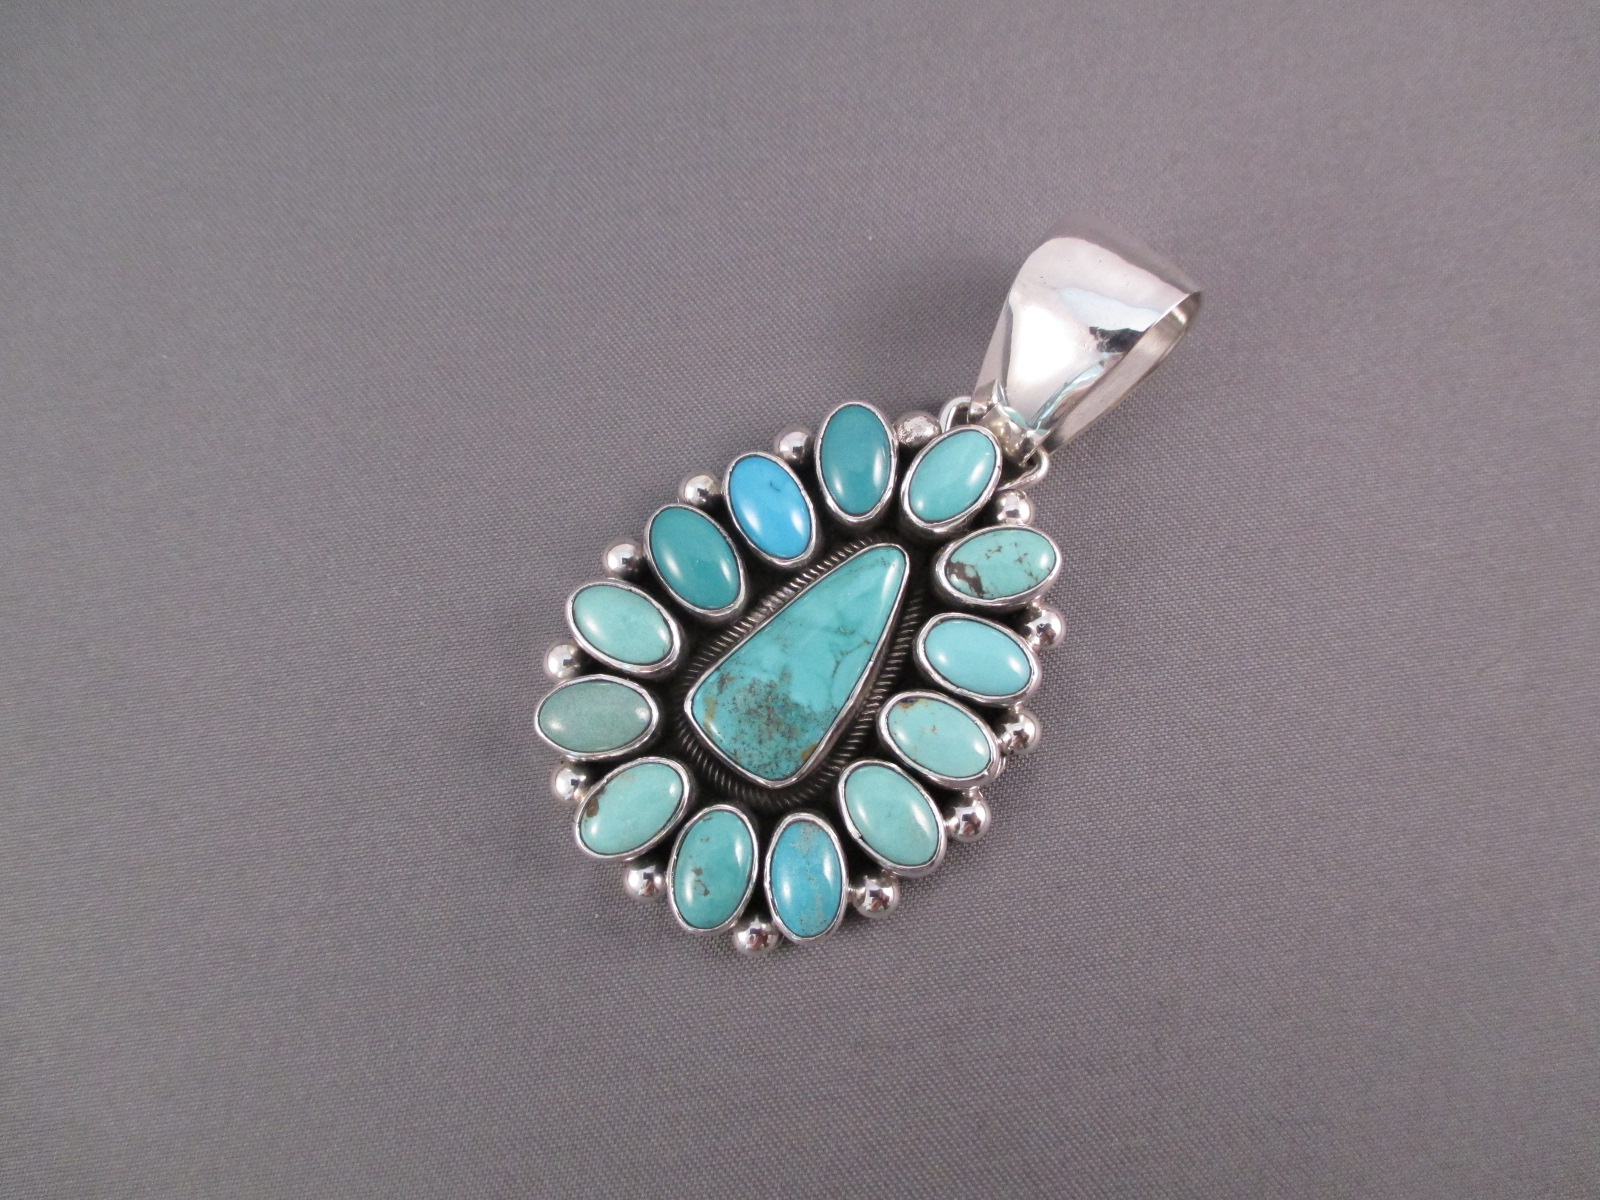 Bea Tom Sterling Silver & Turquoise Pendant